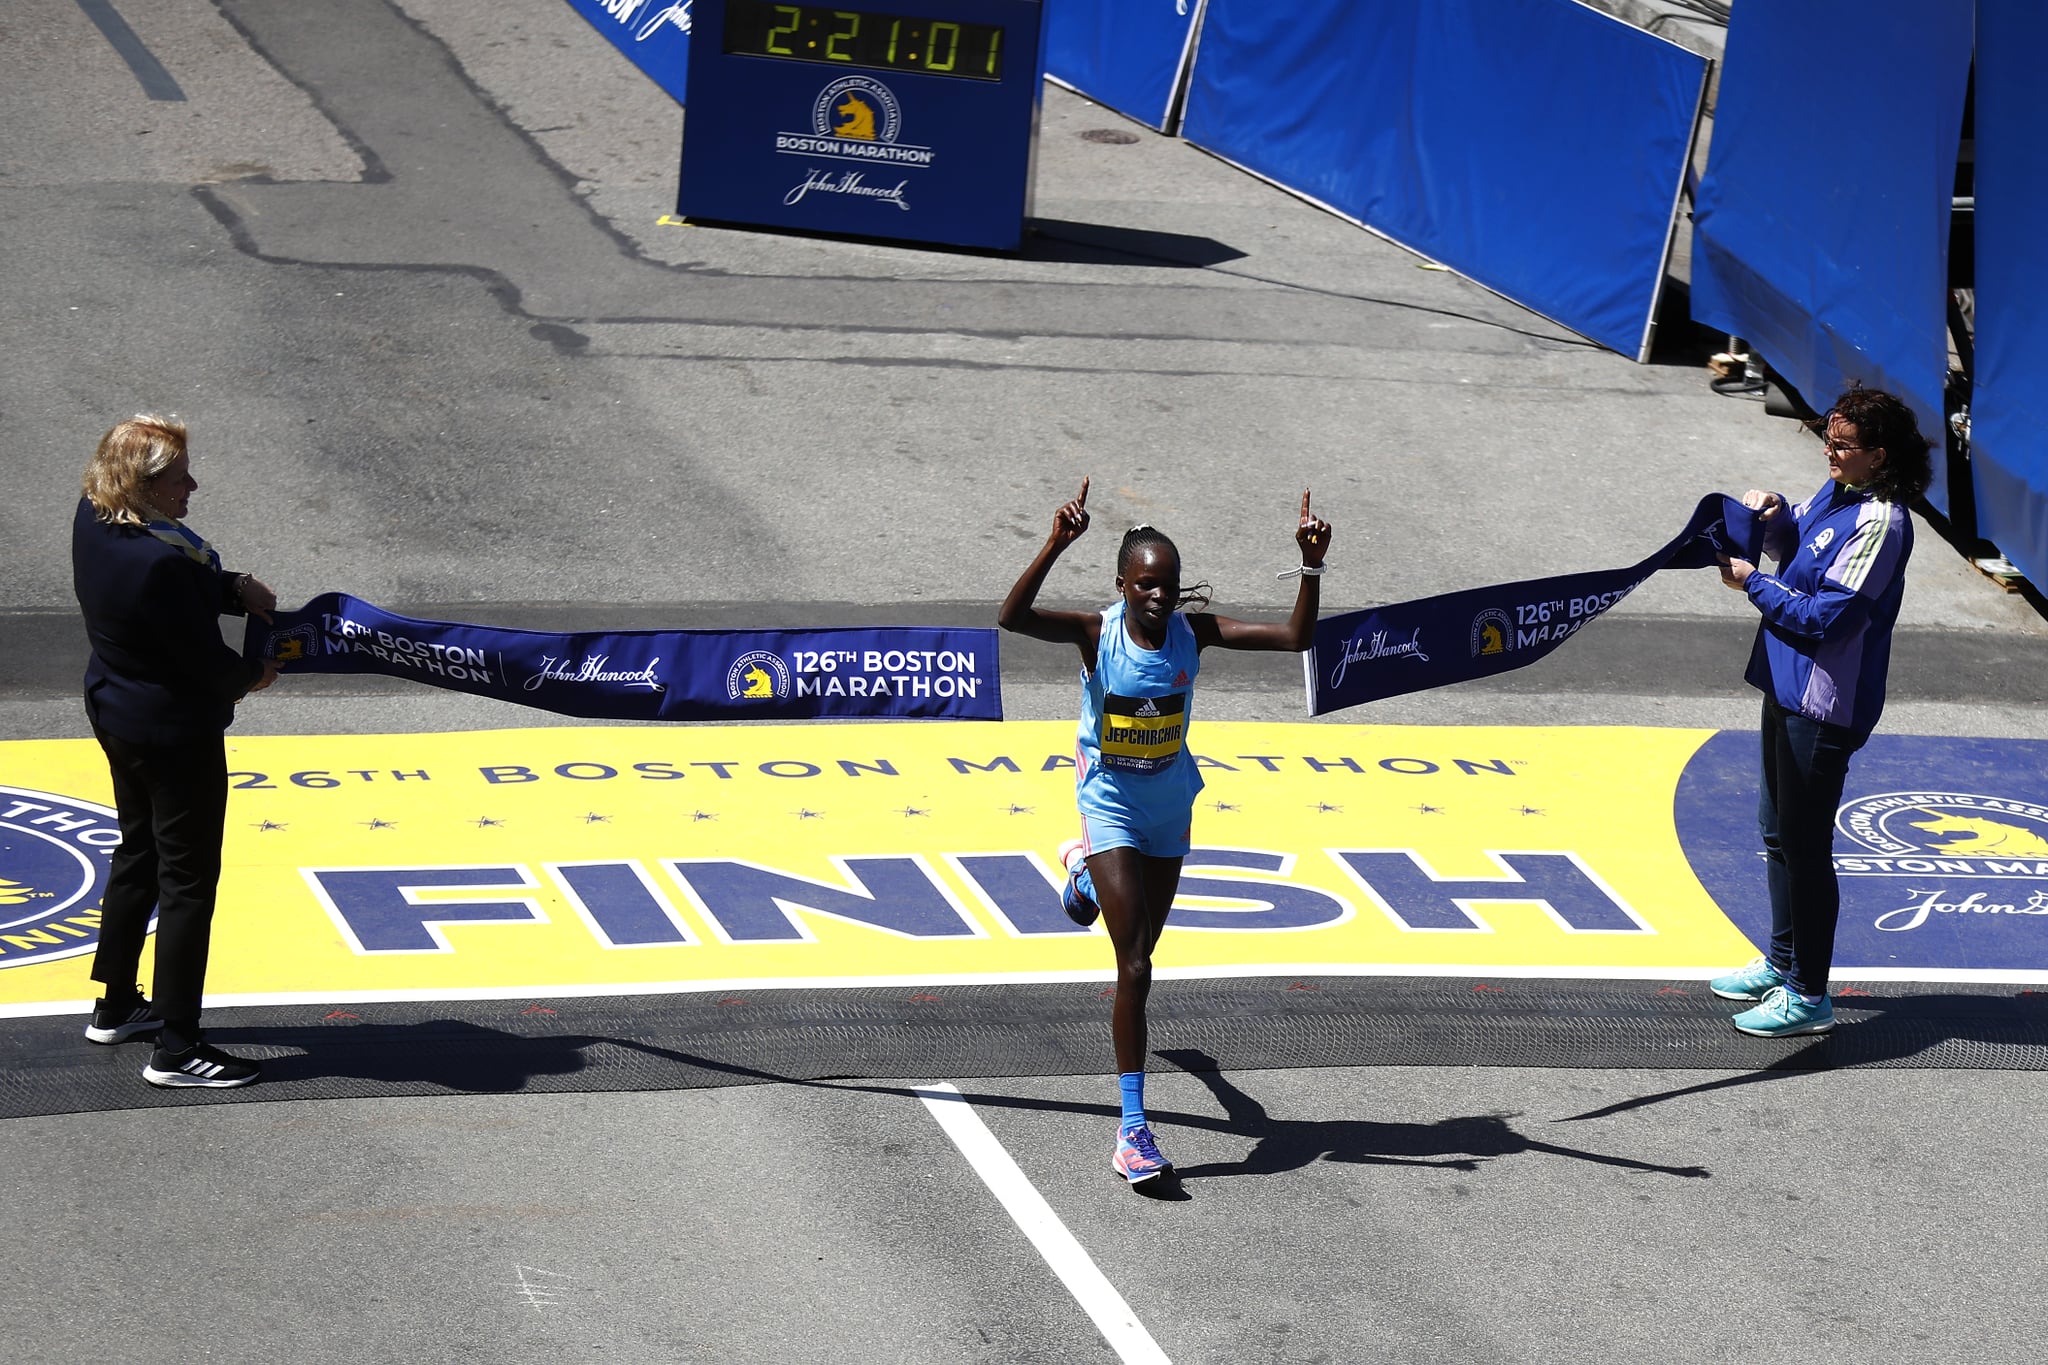 BOSTON, MA - APRIL 18: Kenyan Peres Gebschershire crossed the finish line to take first place in the Women's Pro division during the 126th Boston Marathon on April 18, 2022 in Boston, Massachusetts.  (Photo by Omar Rawlings/Getty Images)